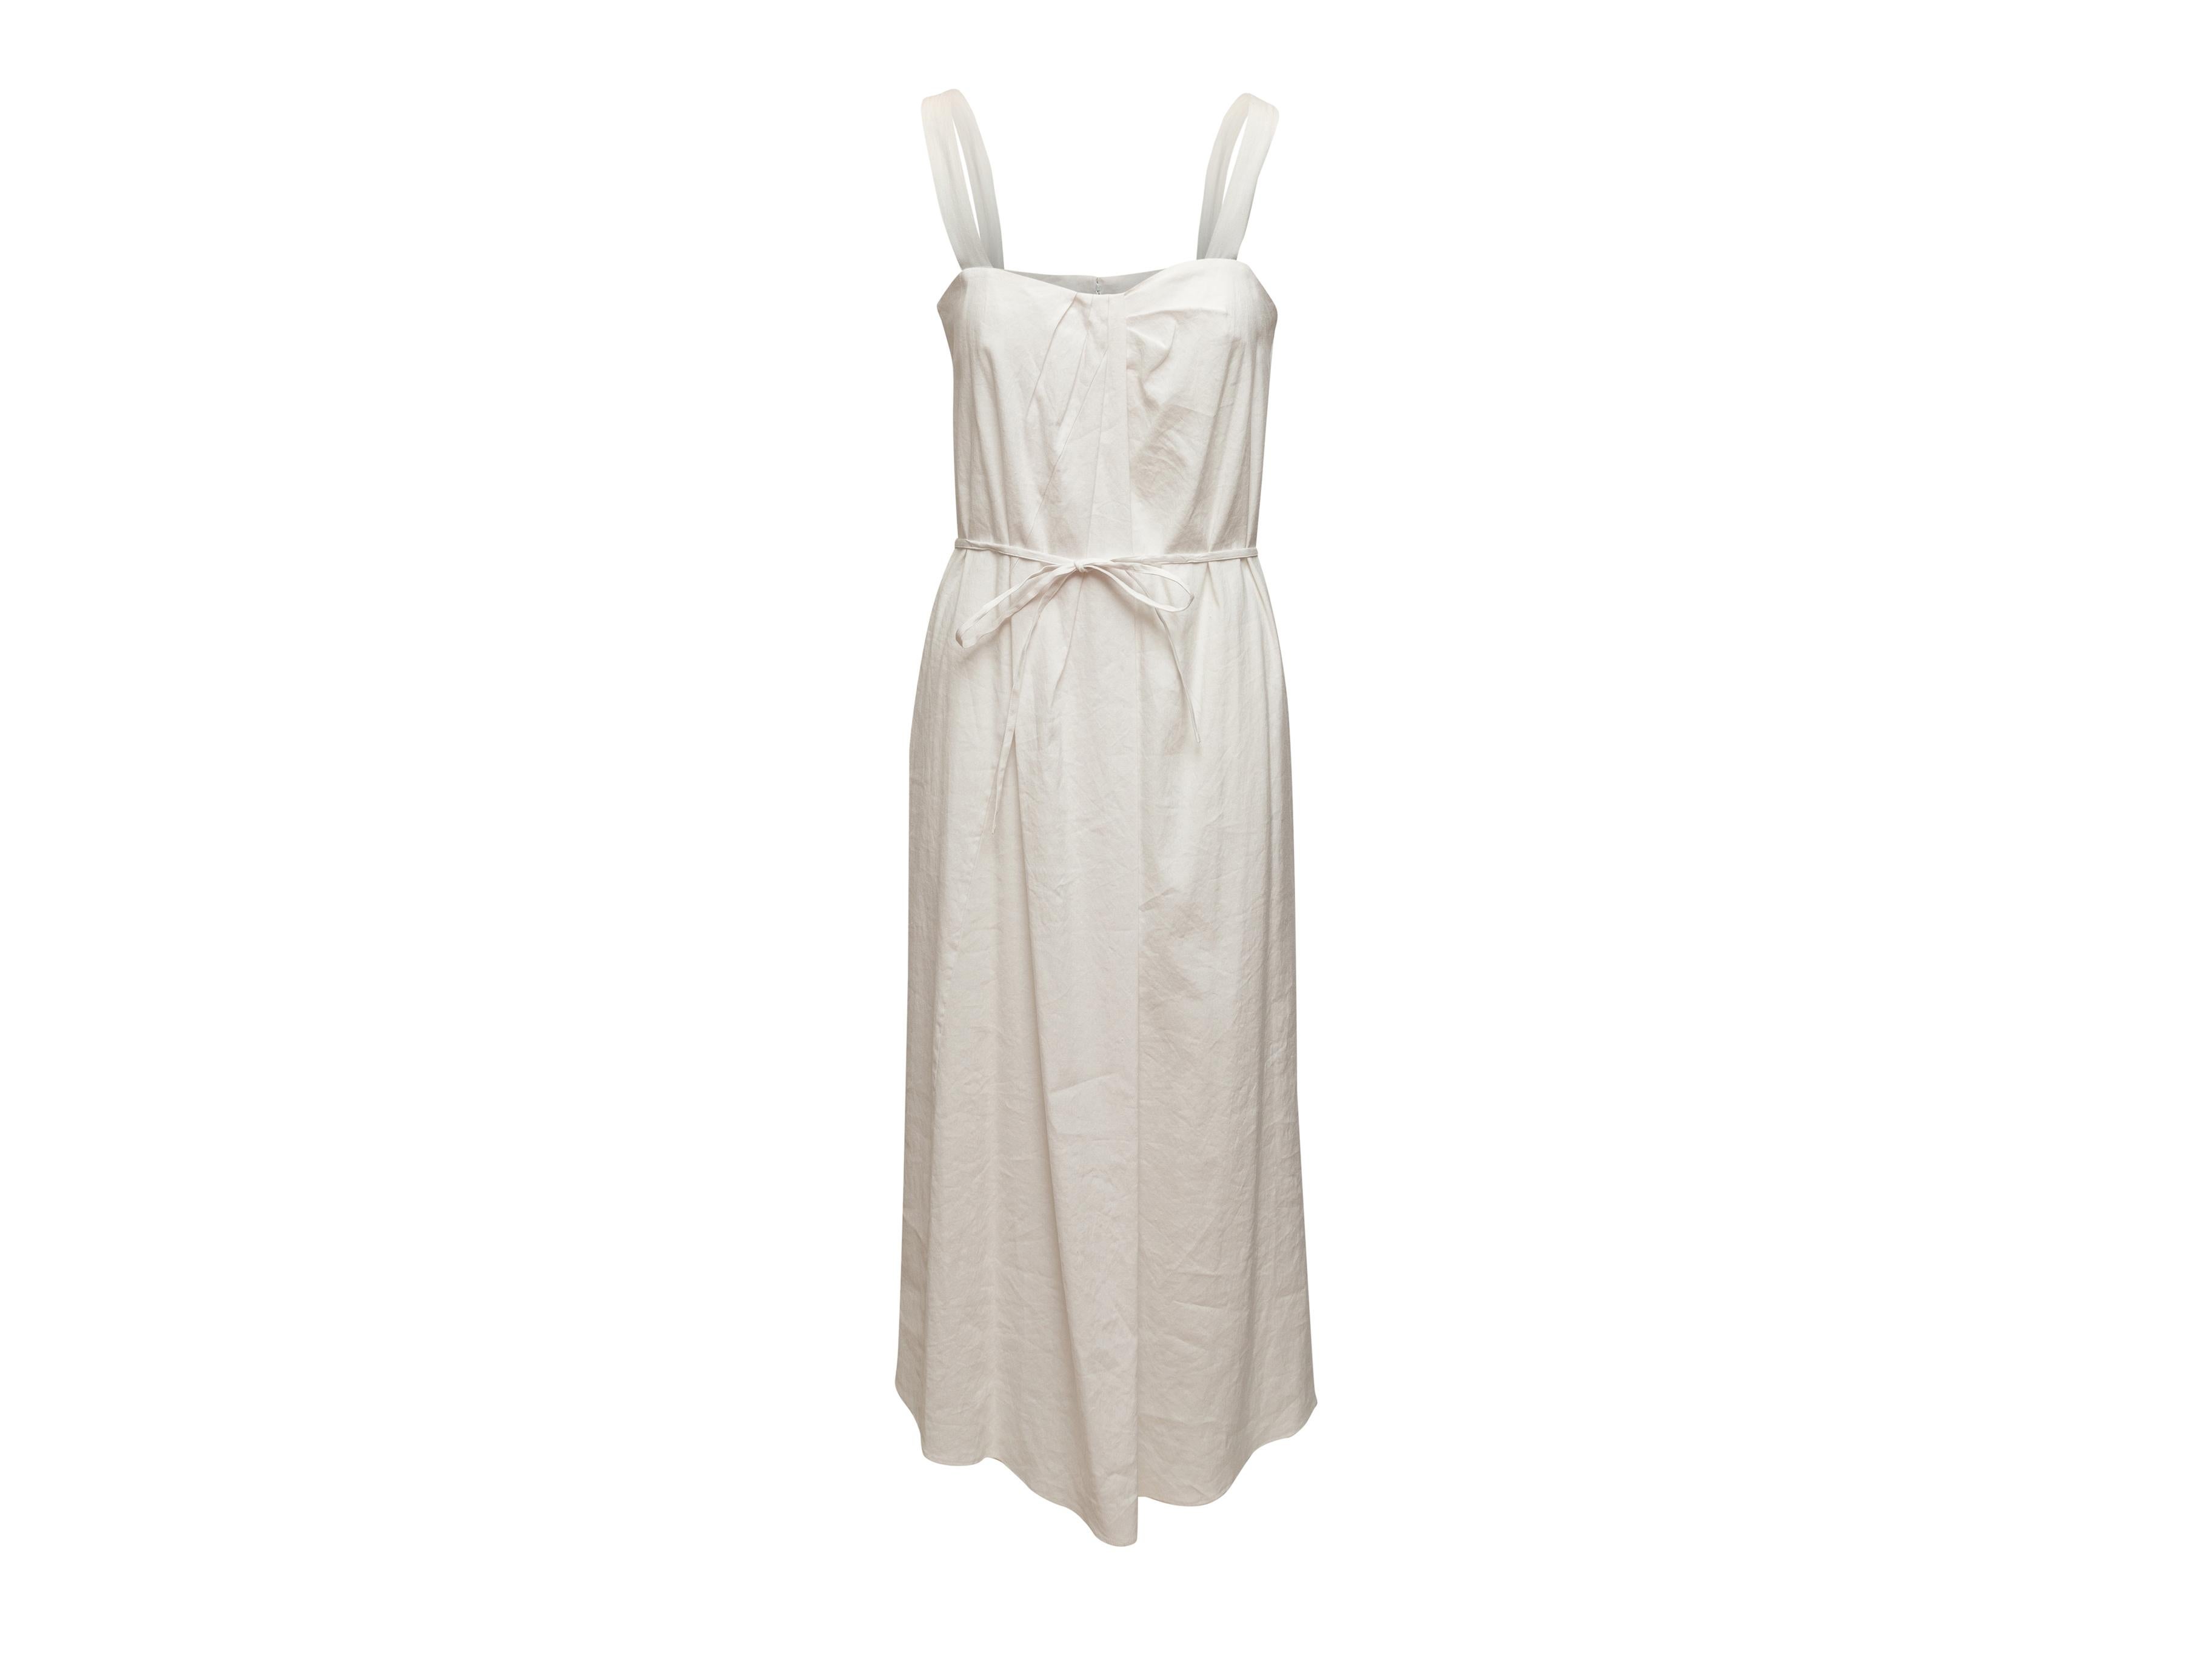 Product details: White sleeveless maxi dress by Vince. Sweetheart neckline. Sash tie at waist. Zip closure at back. 34